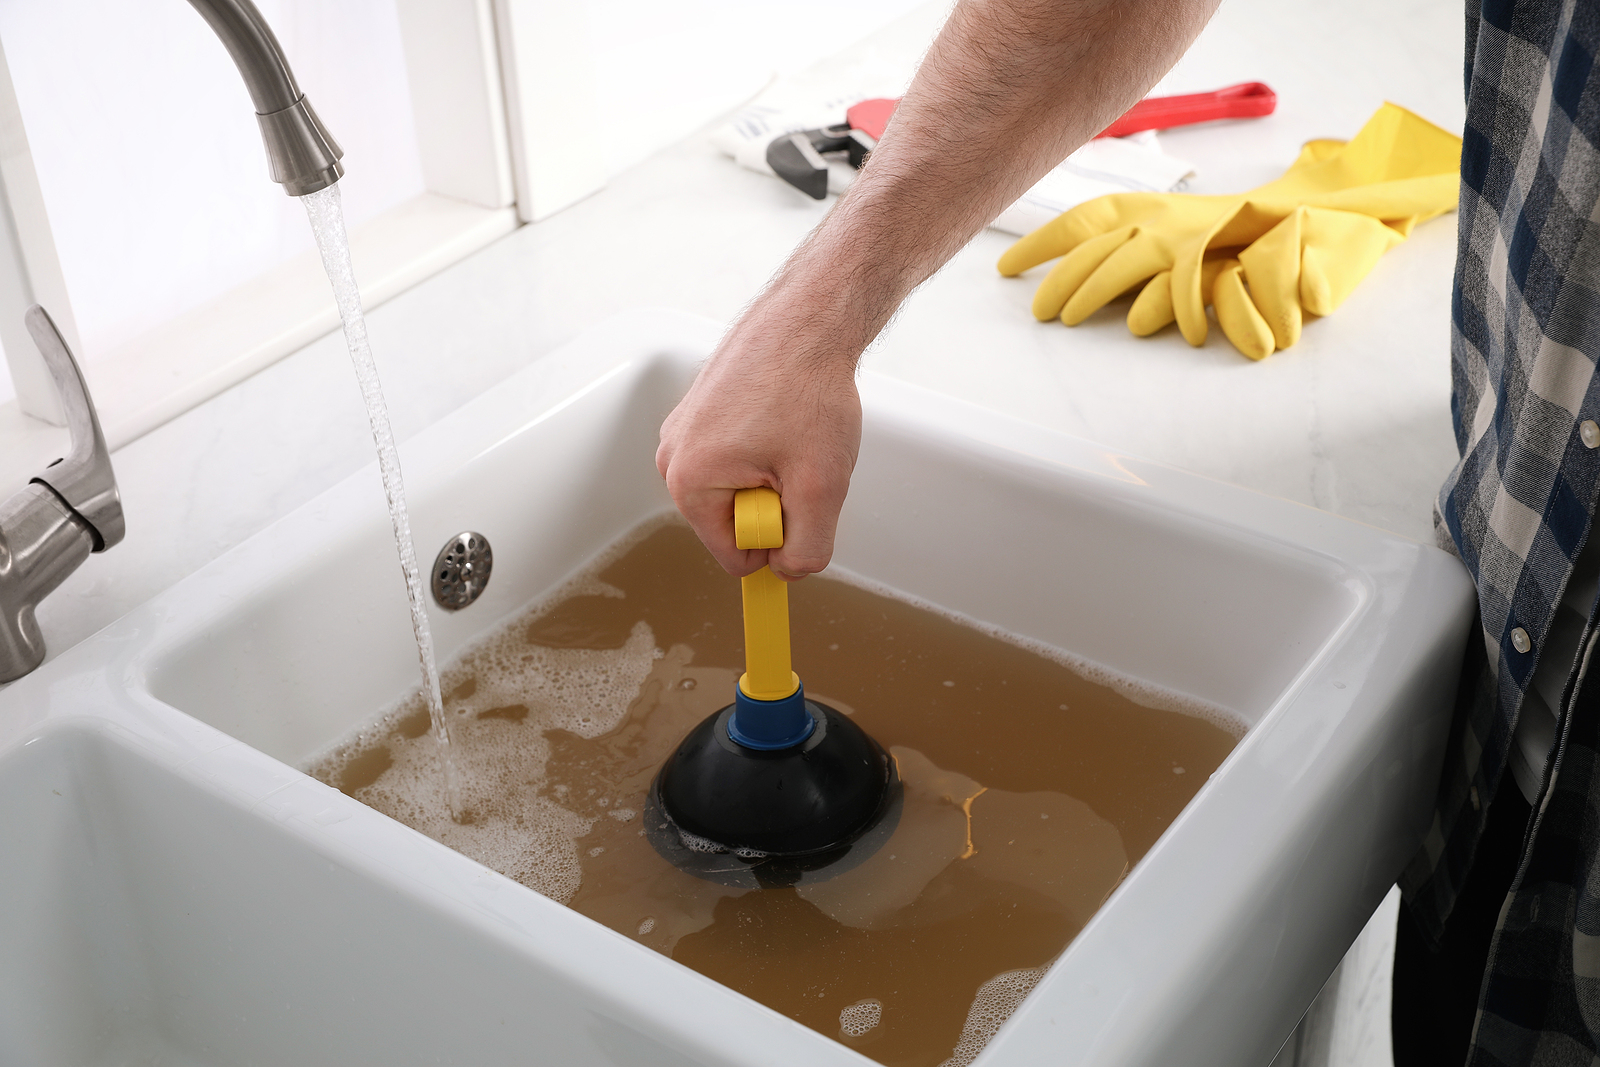 Unclog Drains Fast Easy With A Zip-It Tool- Keep Drains Flowing No